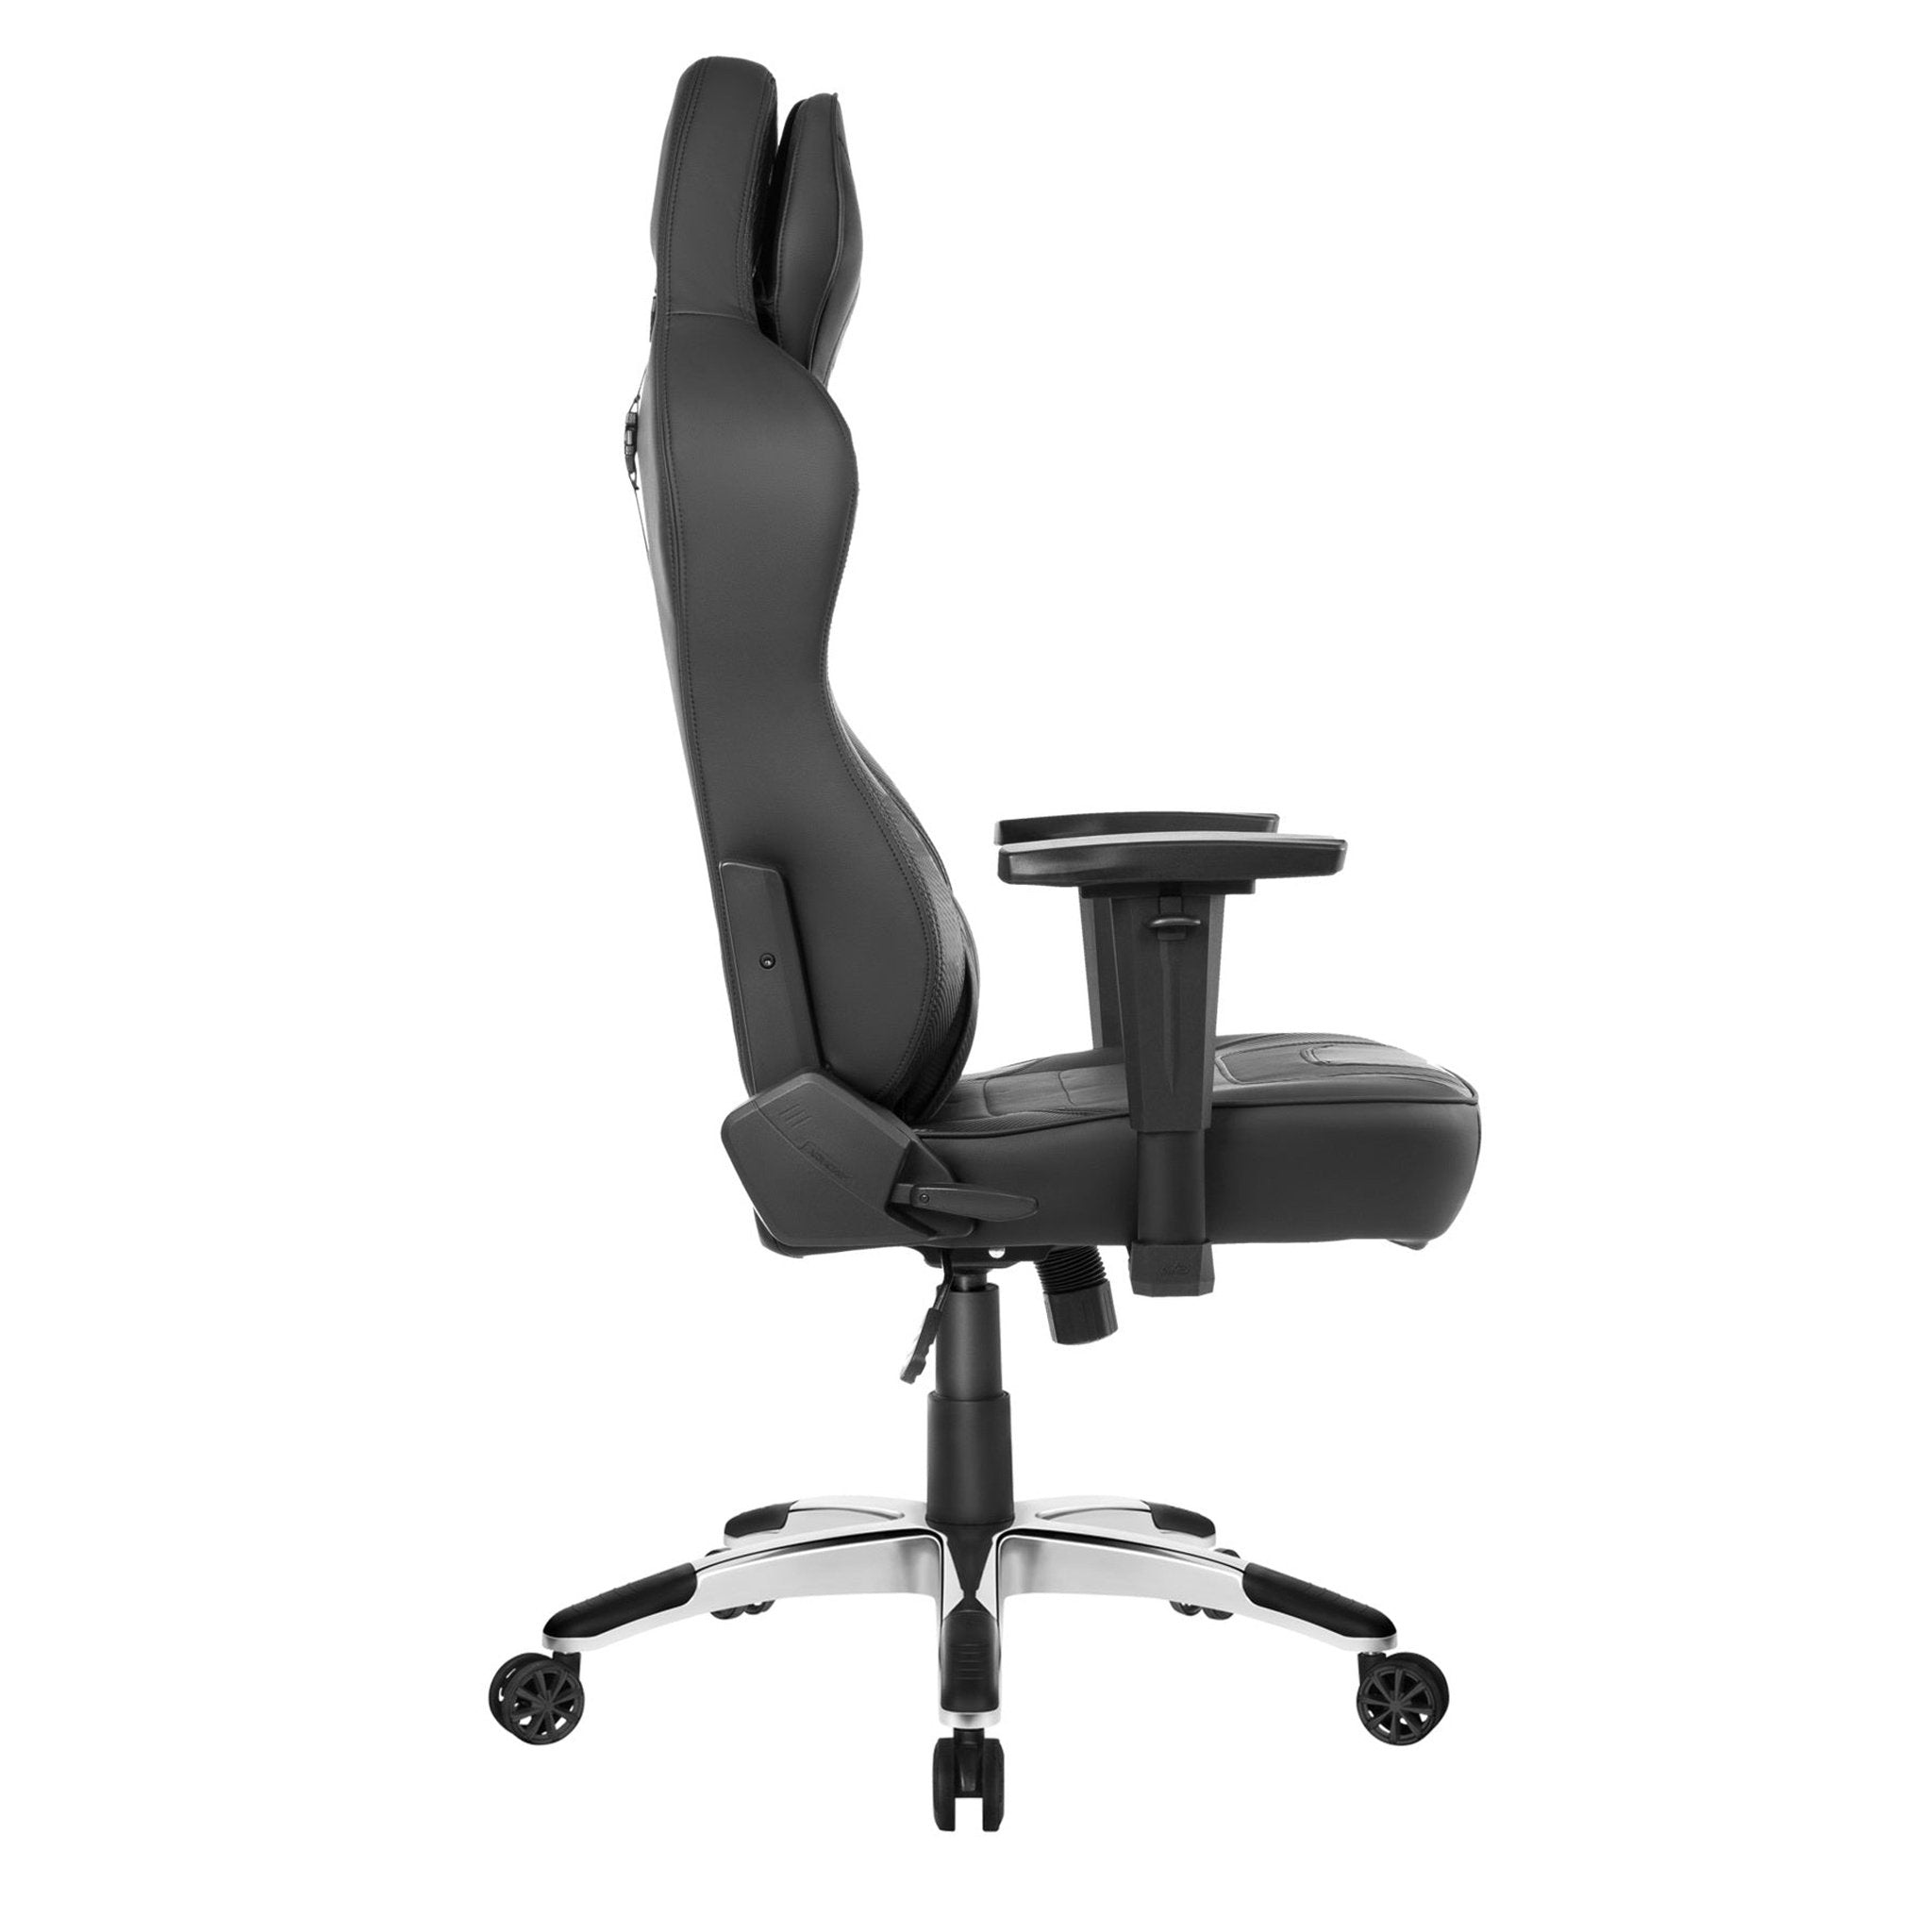 AKRacing Obsidian Office Series Gaming Chair